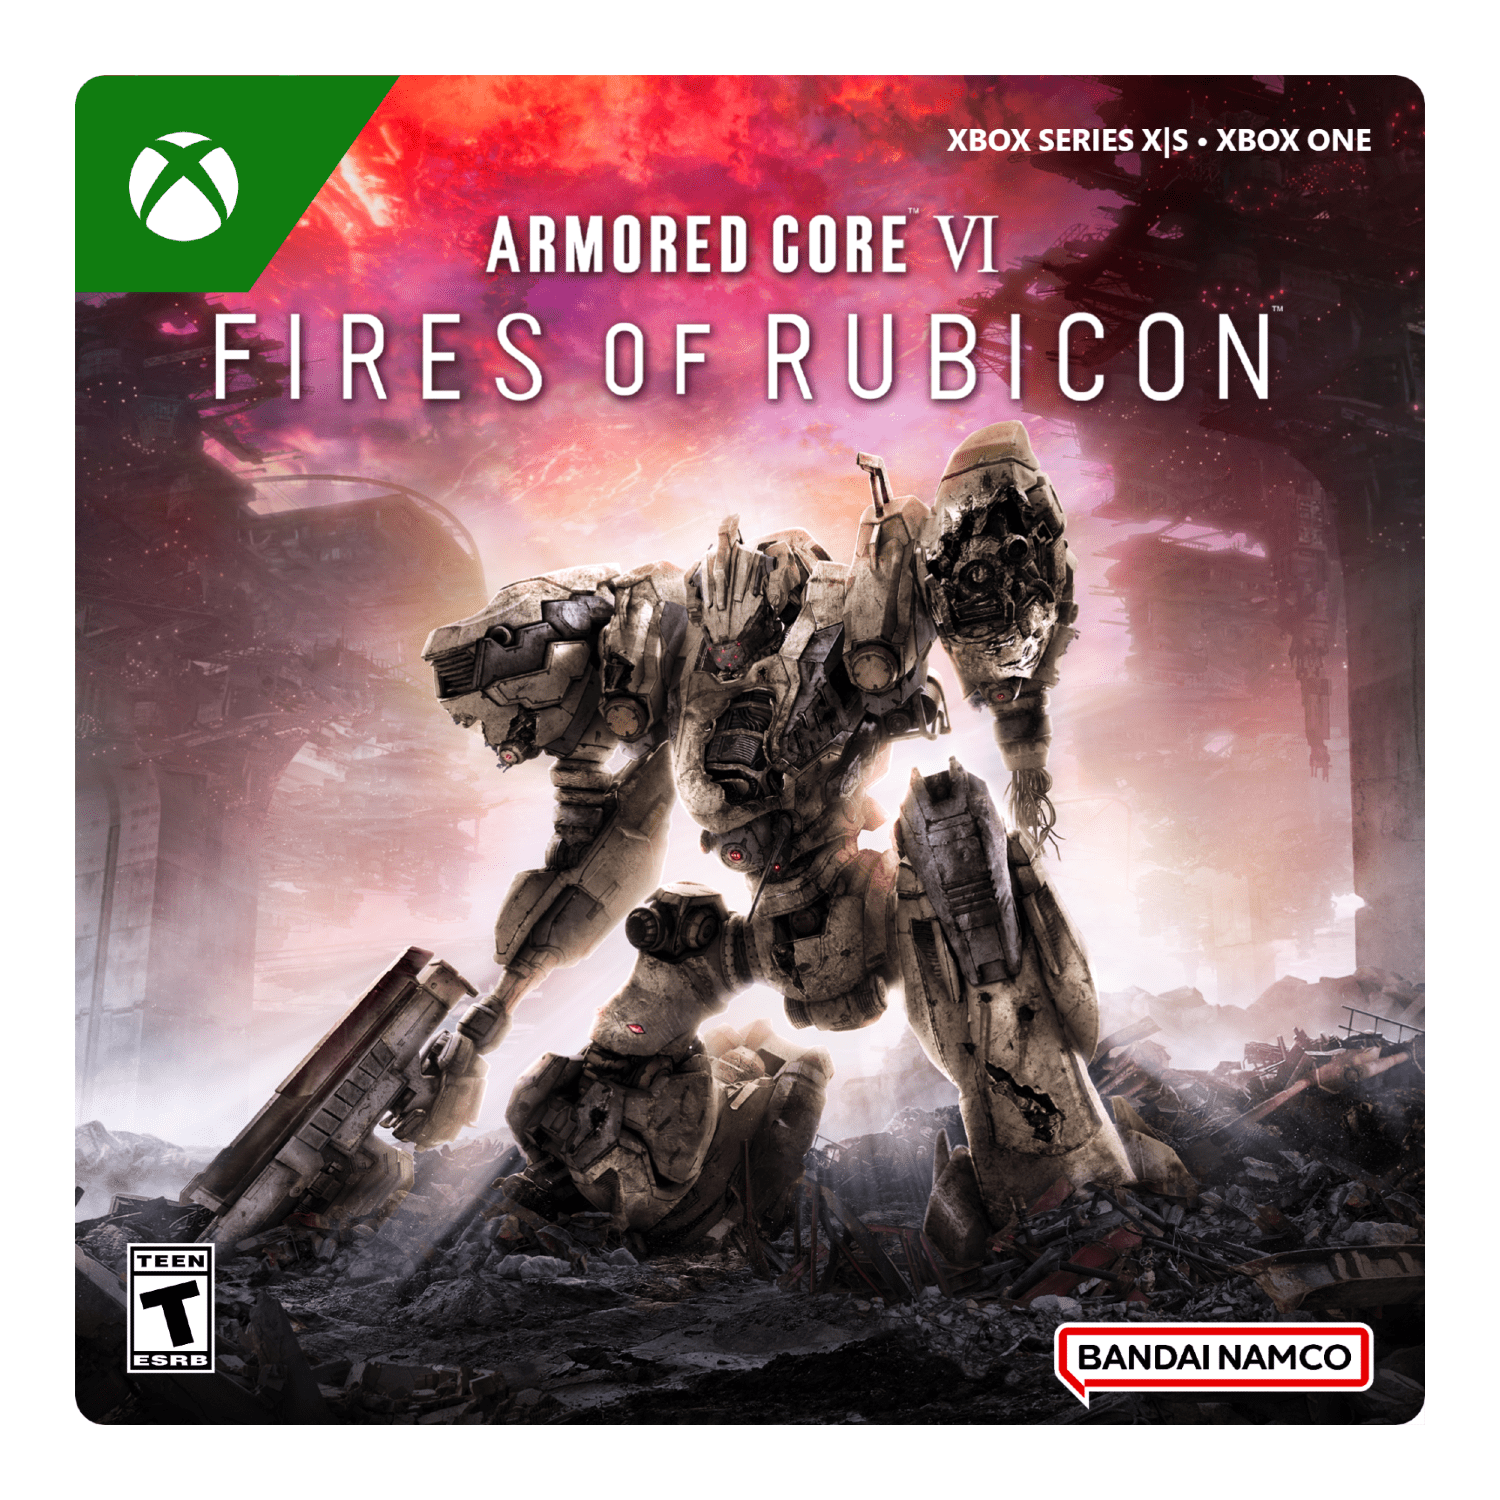 Armored Core 6 Confirmed For 2023